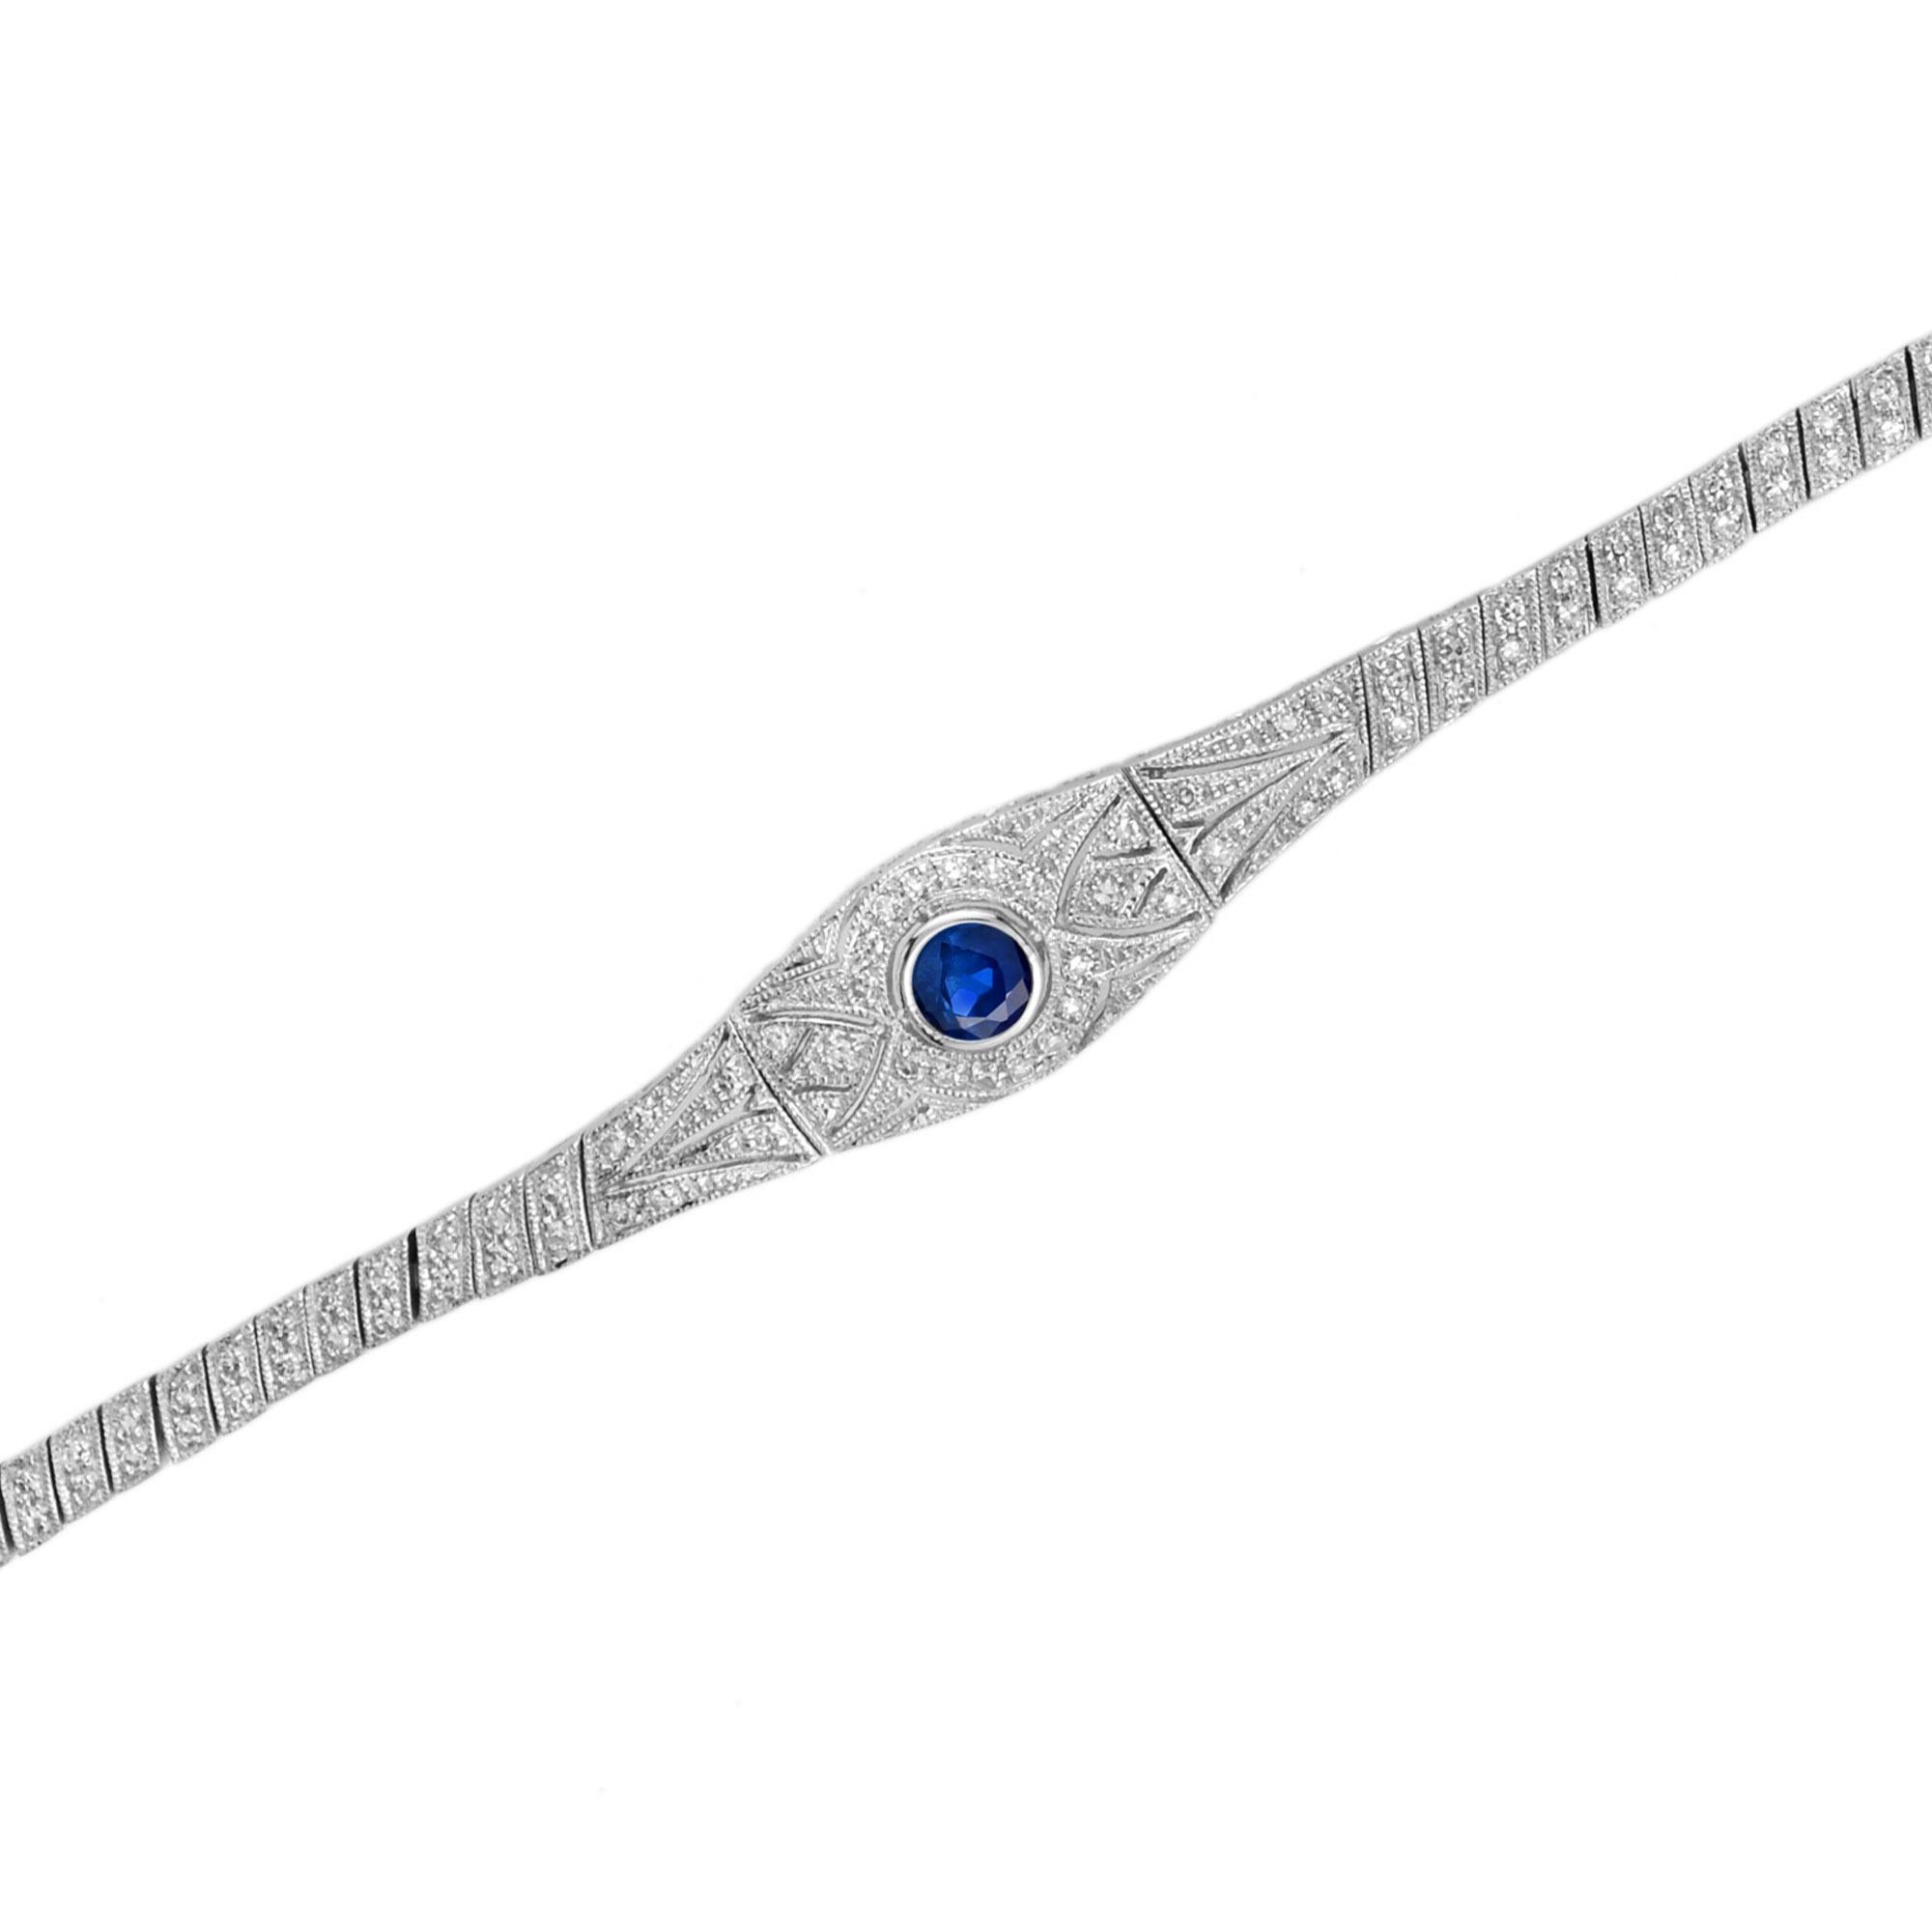 Wreath your wrist in a tremendous twinkling with this delectable sapphire and diamond bracelet in the Art Deco ear design. White gold forms a sleek single-row line bracelet with a wider, rounded central motif featuring scintillating blue